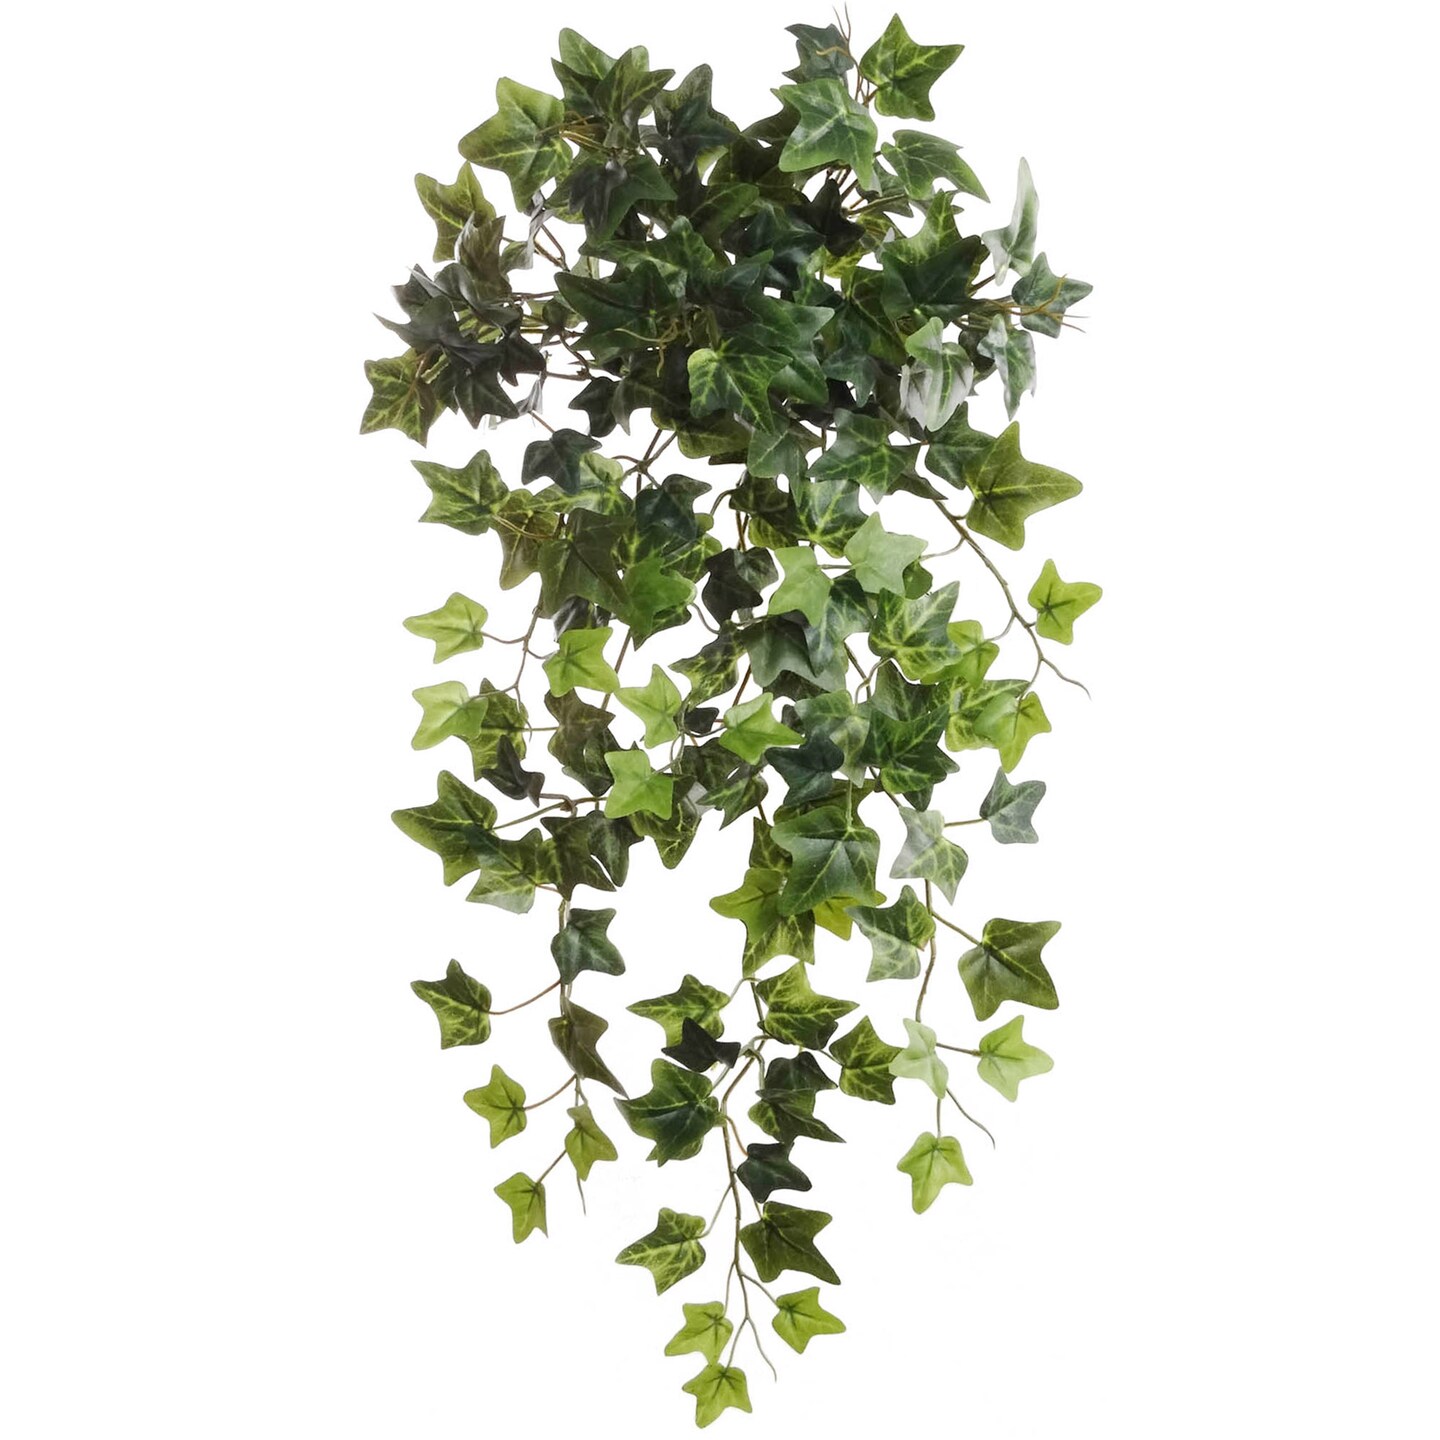 Box of 6: English Ivy Plant with 204 Realistic Silk Leaves, UV Resistant, Indoor/Outdoor, Hanging Plants, Faux Greenery, Patio &#x26; Garden, Home &#x26; Office Decor